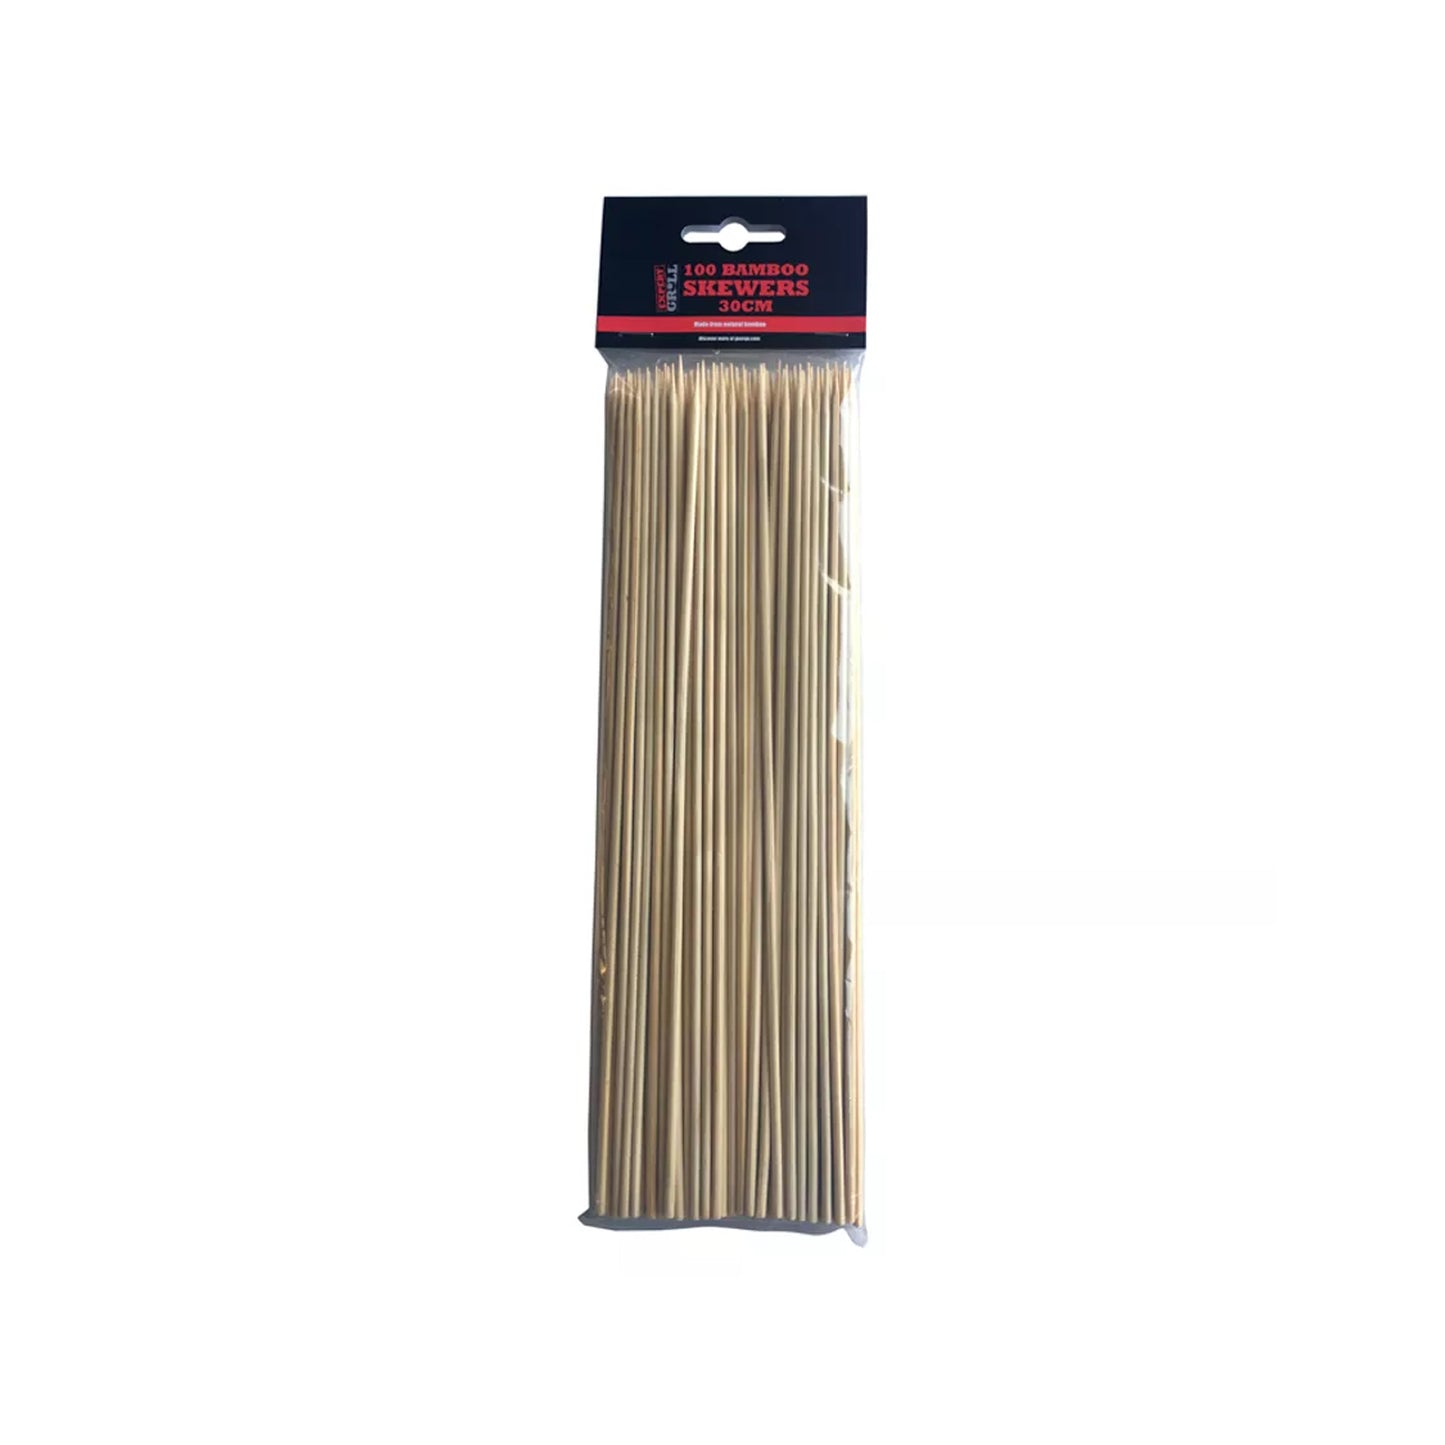 Expert Grill 30cm Bamboo Skewers x 100